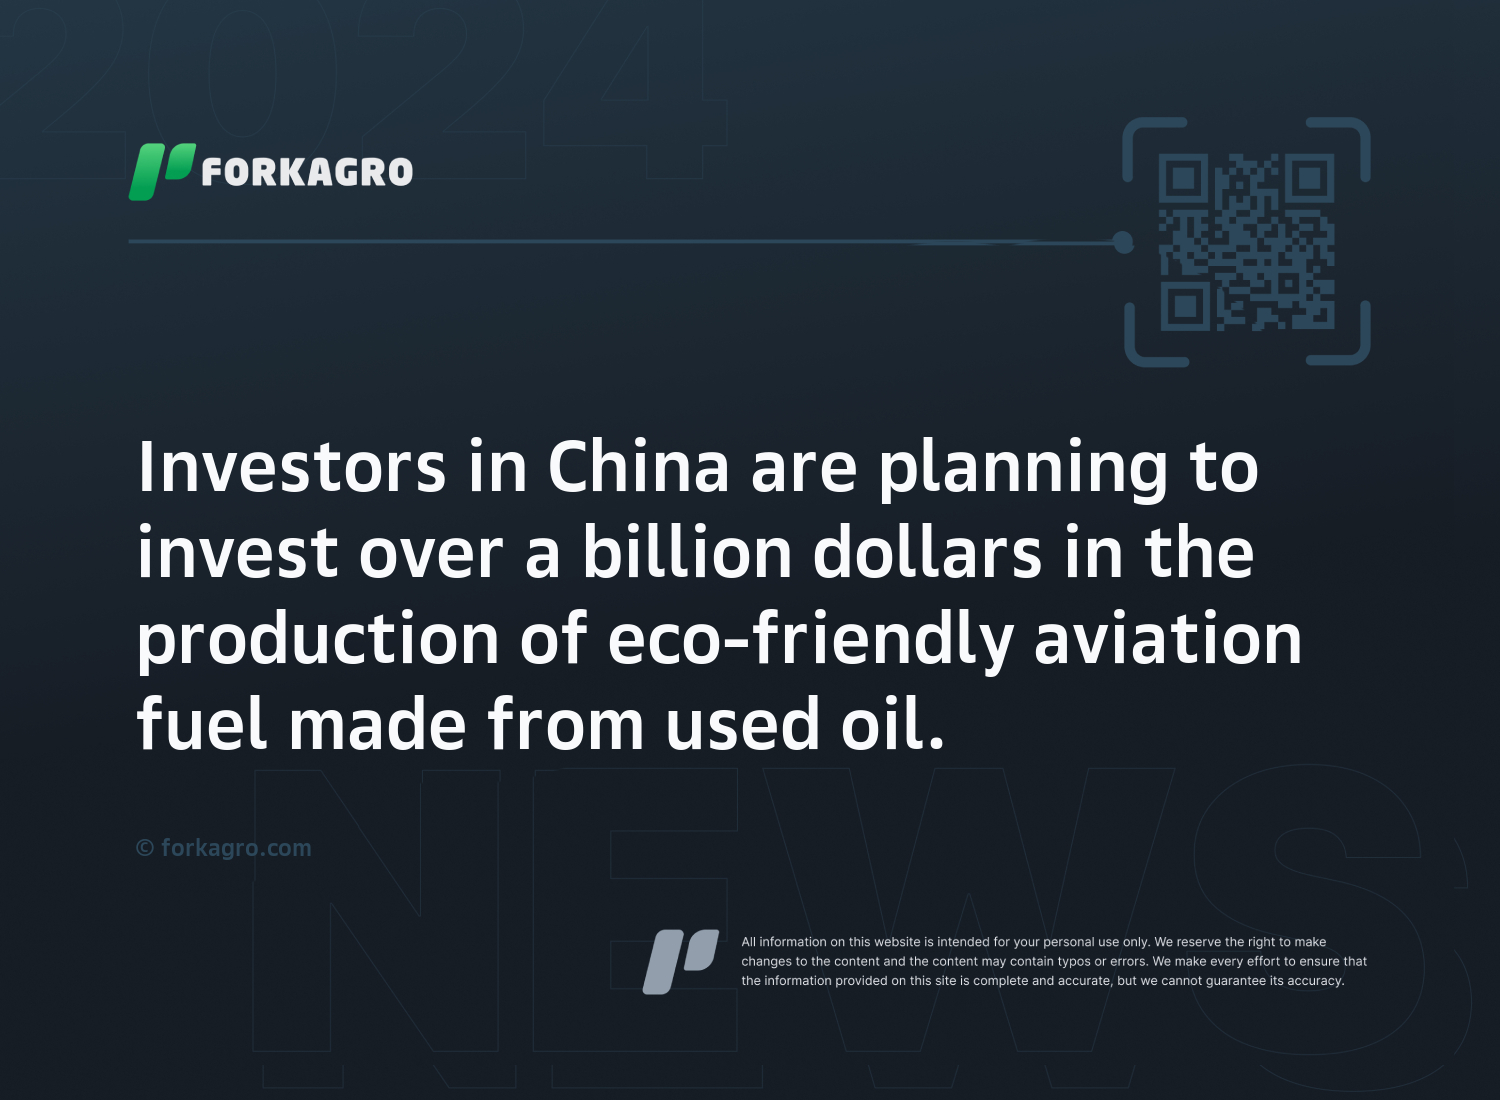 Investors in China are planning to invest over a billion dollars in the production of eco-friendly aviation fuel made from used oil.